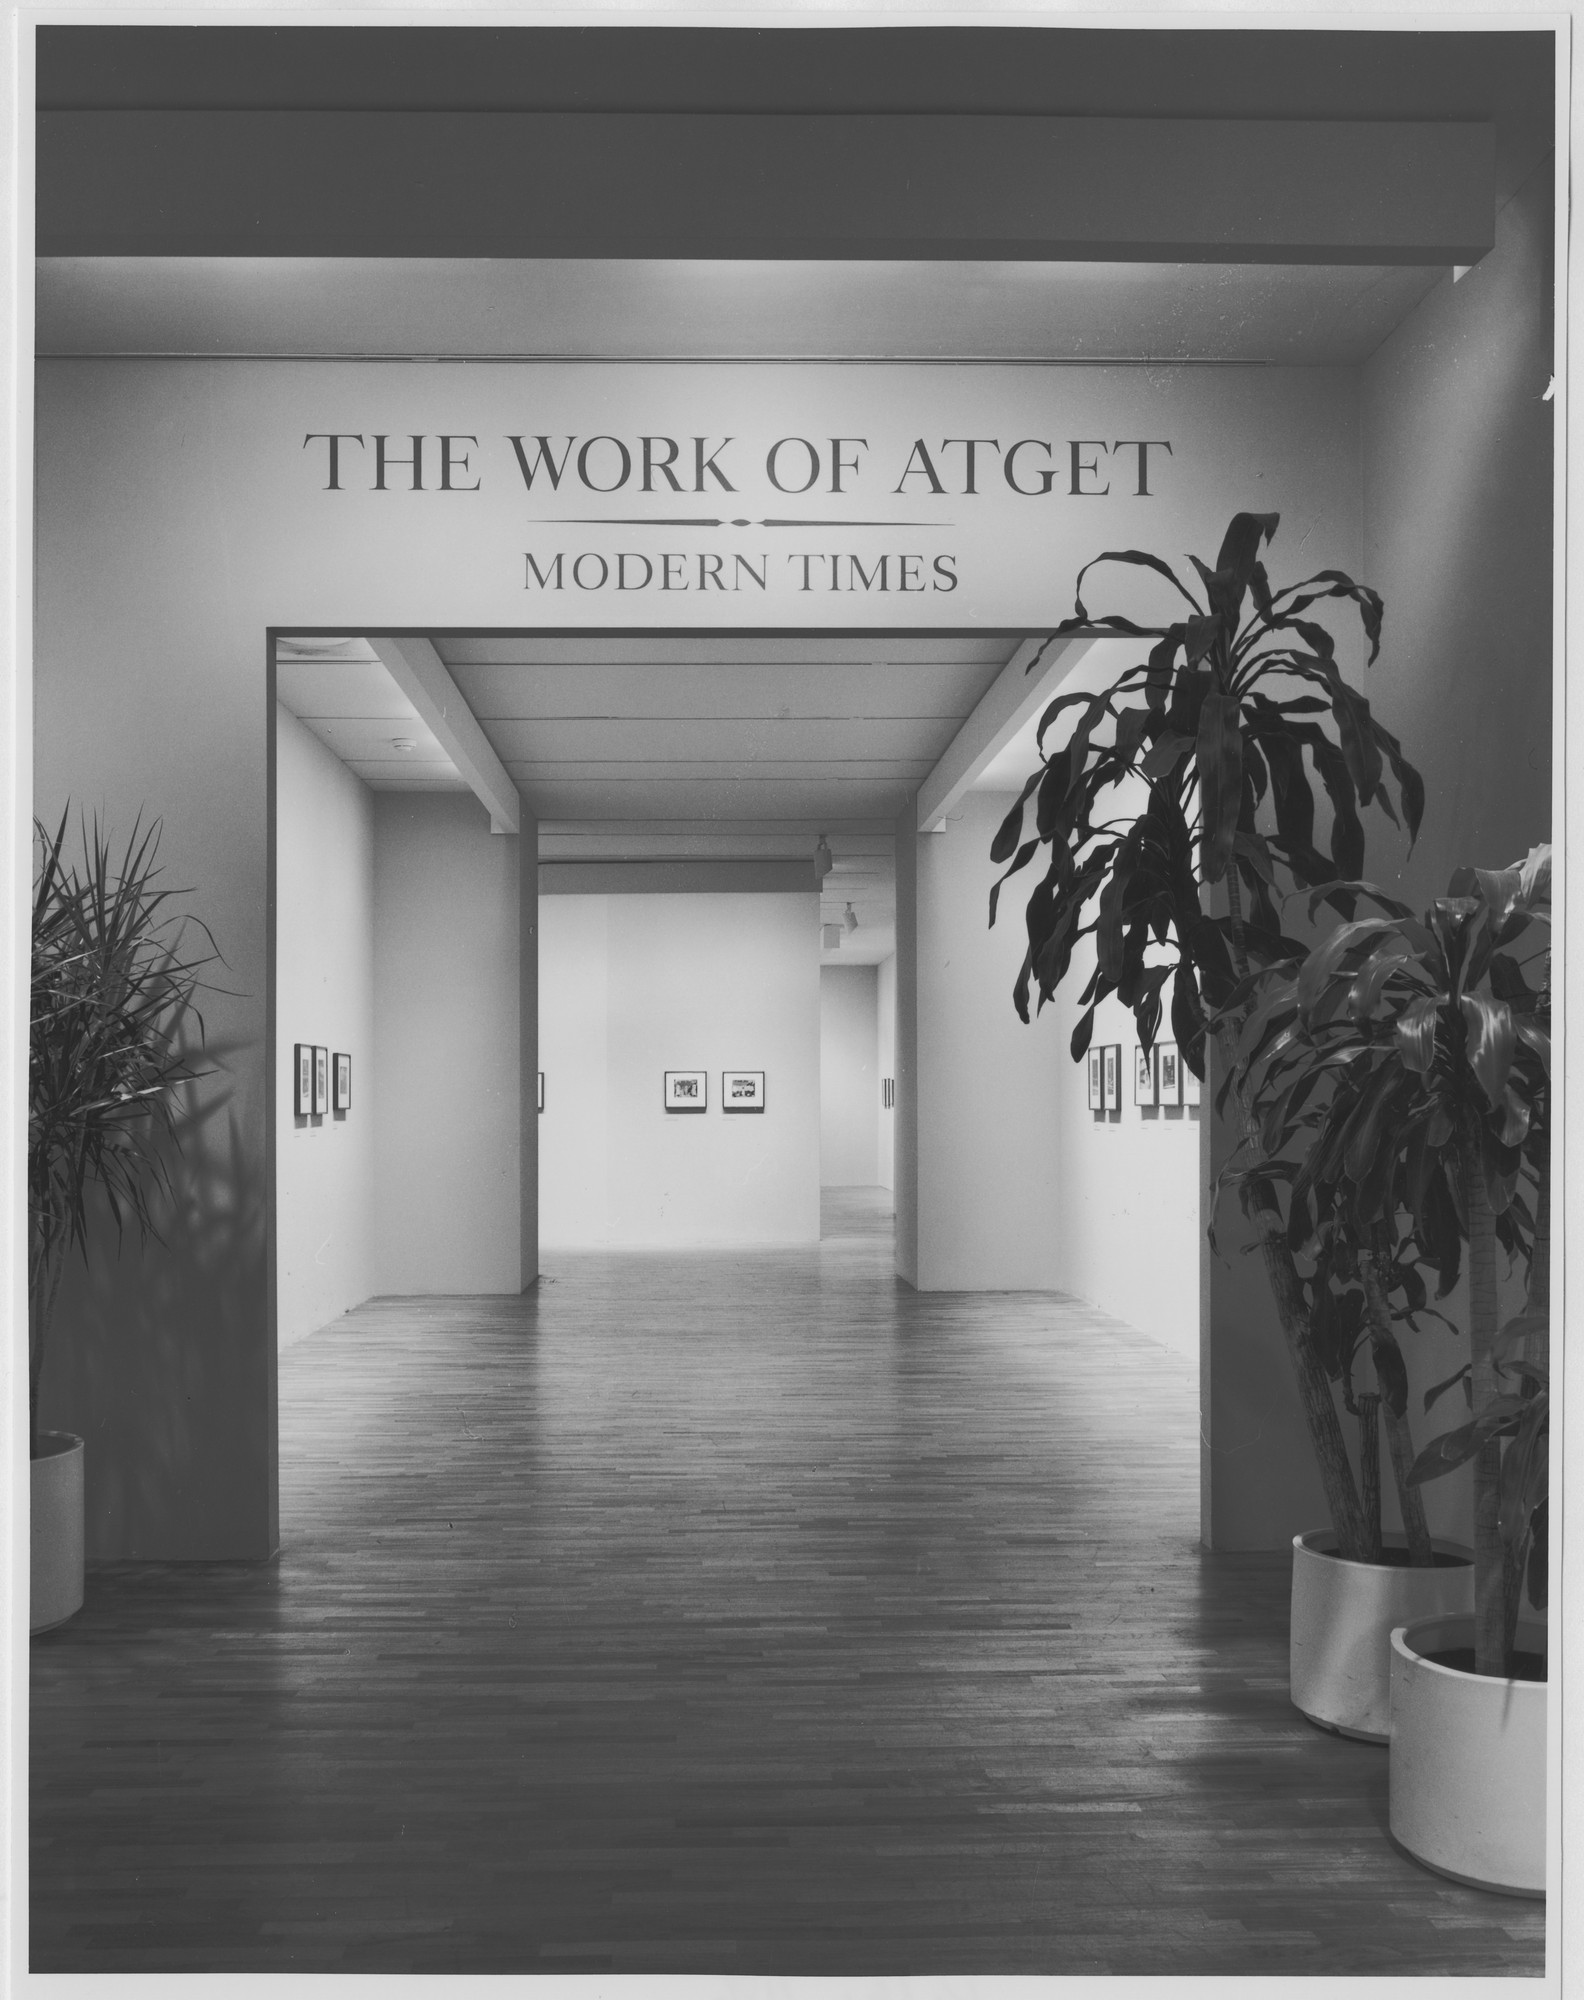 The Work of Atget: Modern Times | MoMA